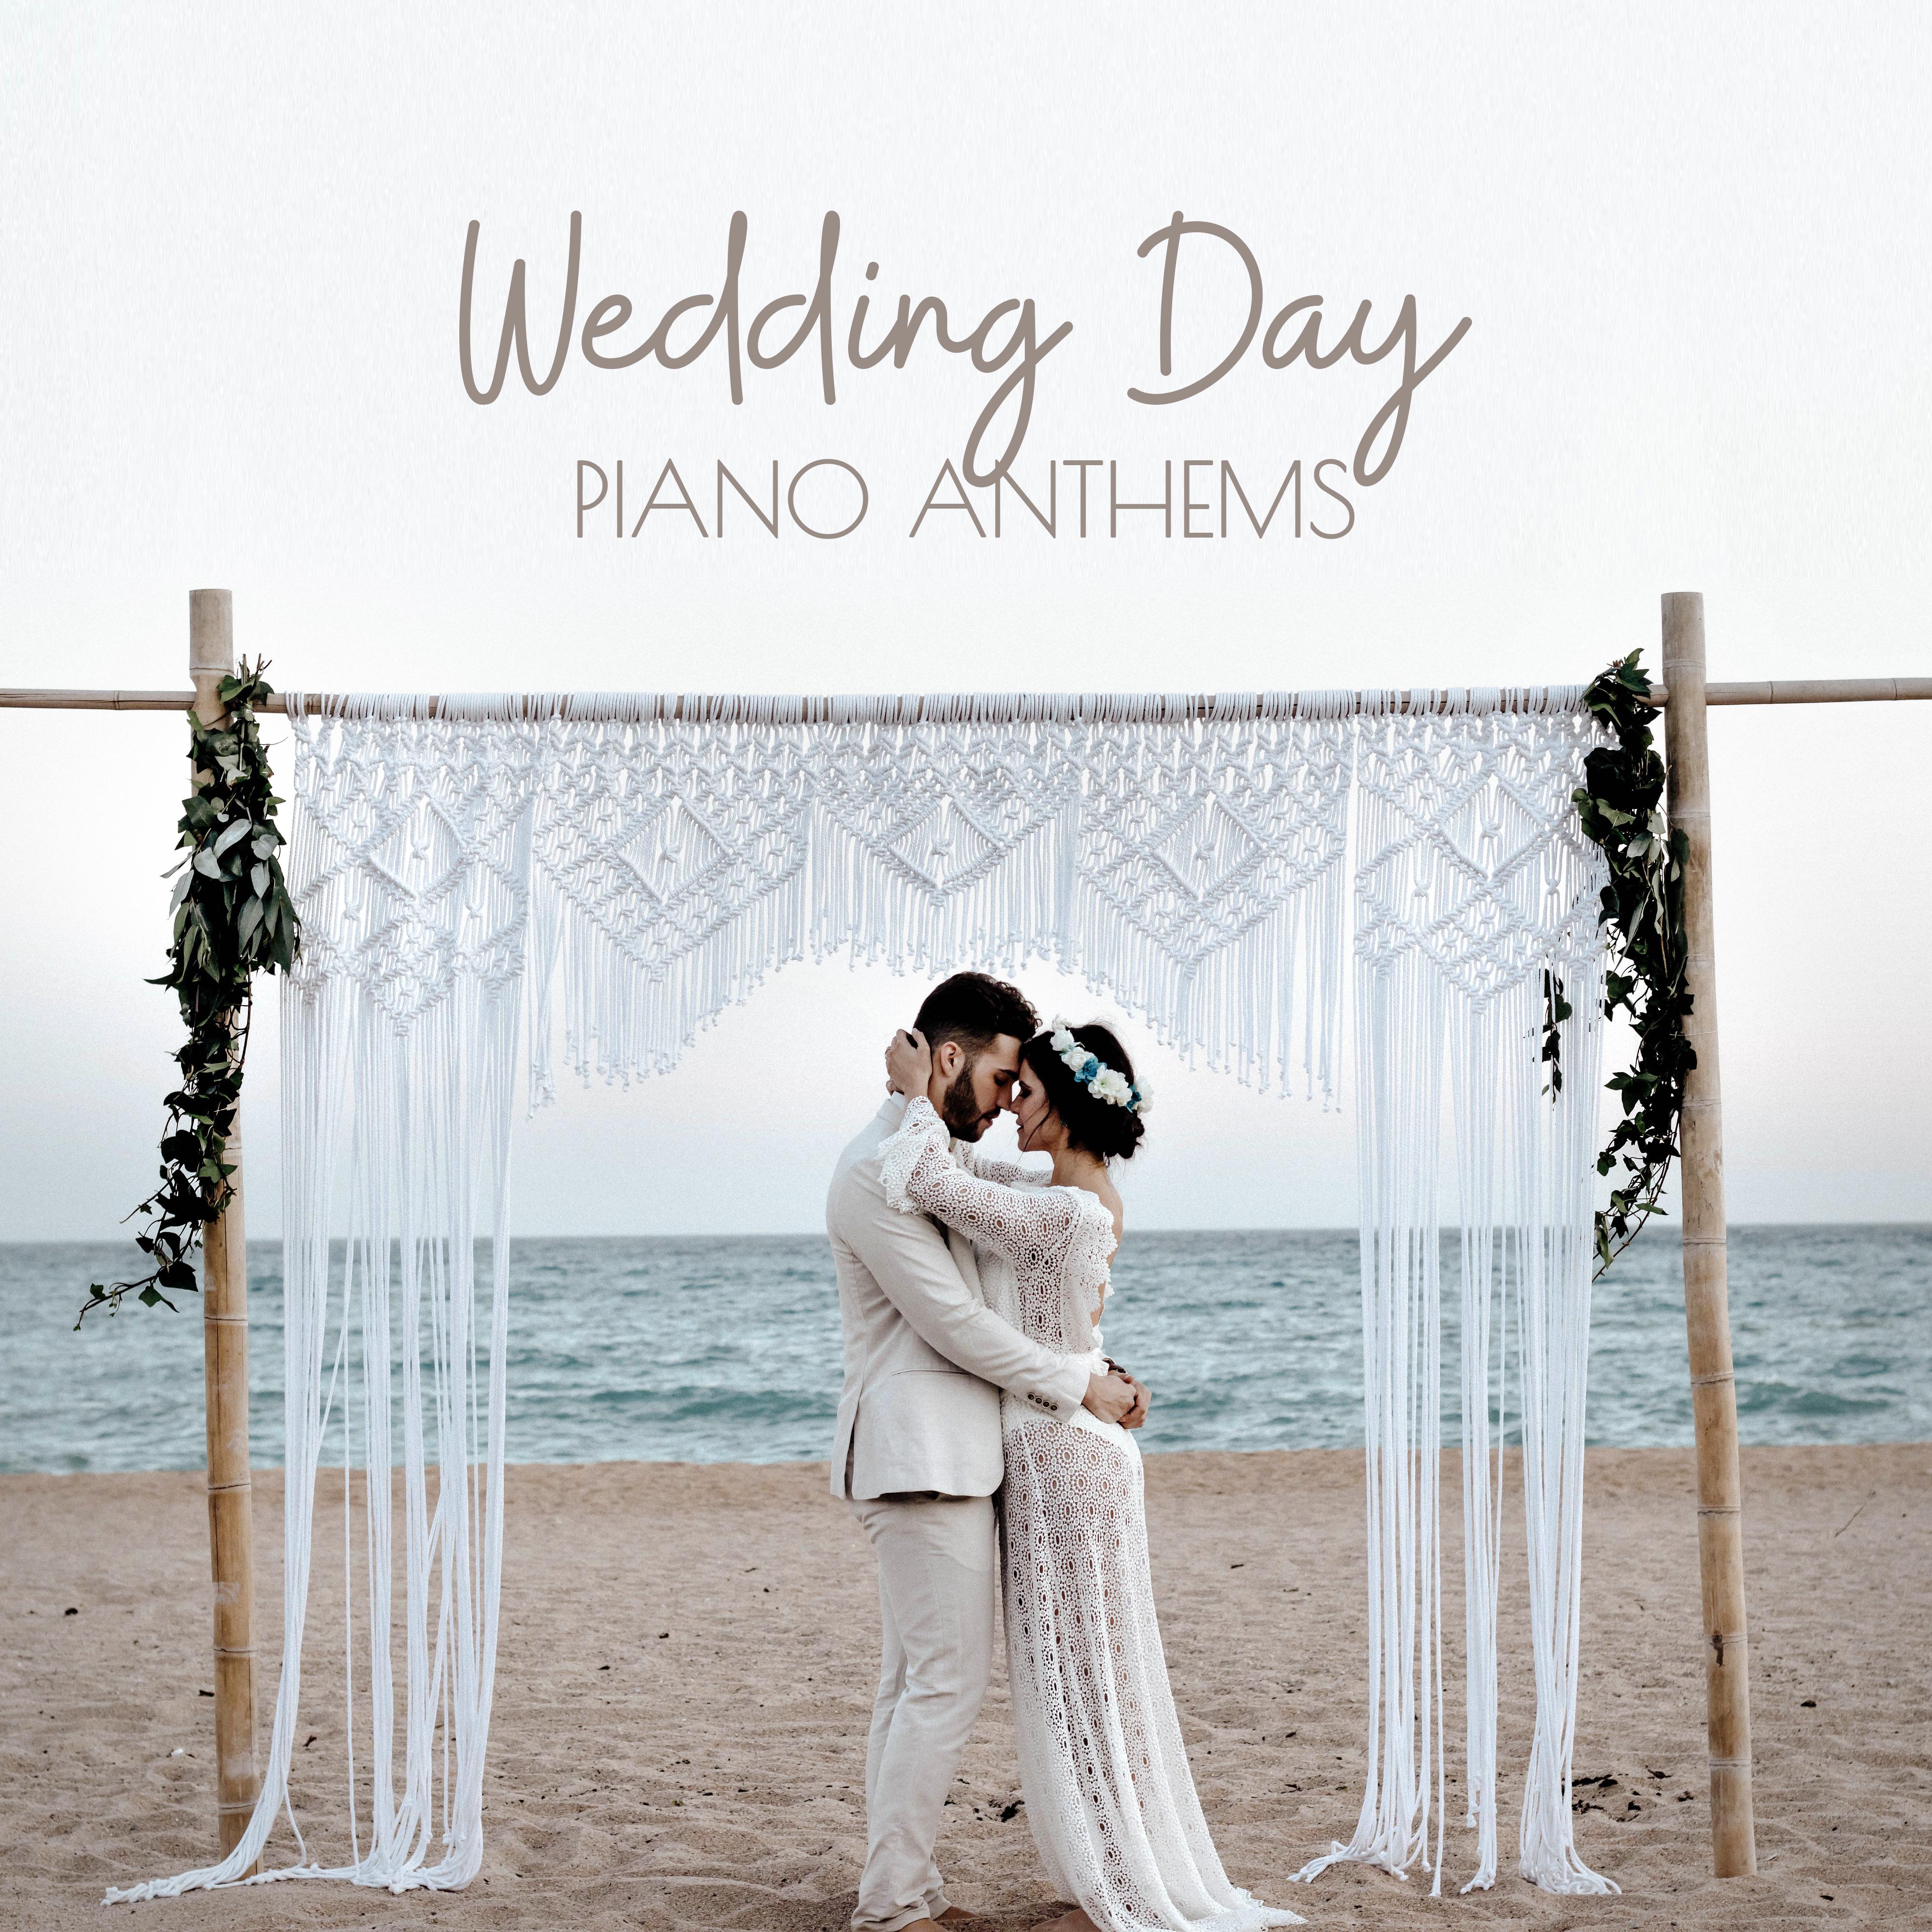 Wedding Day Piano Anthems: Best Touching Piano Love Music for Wedding 2019